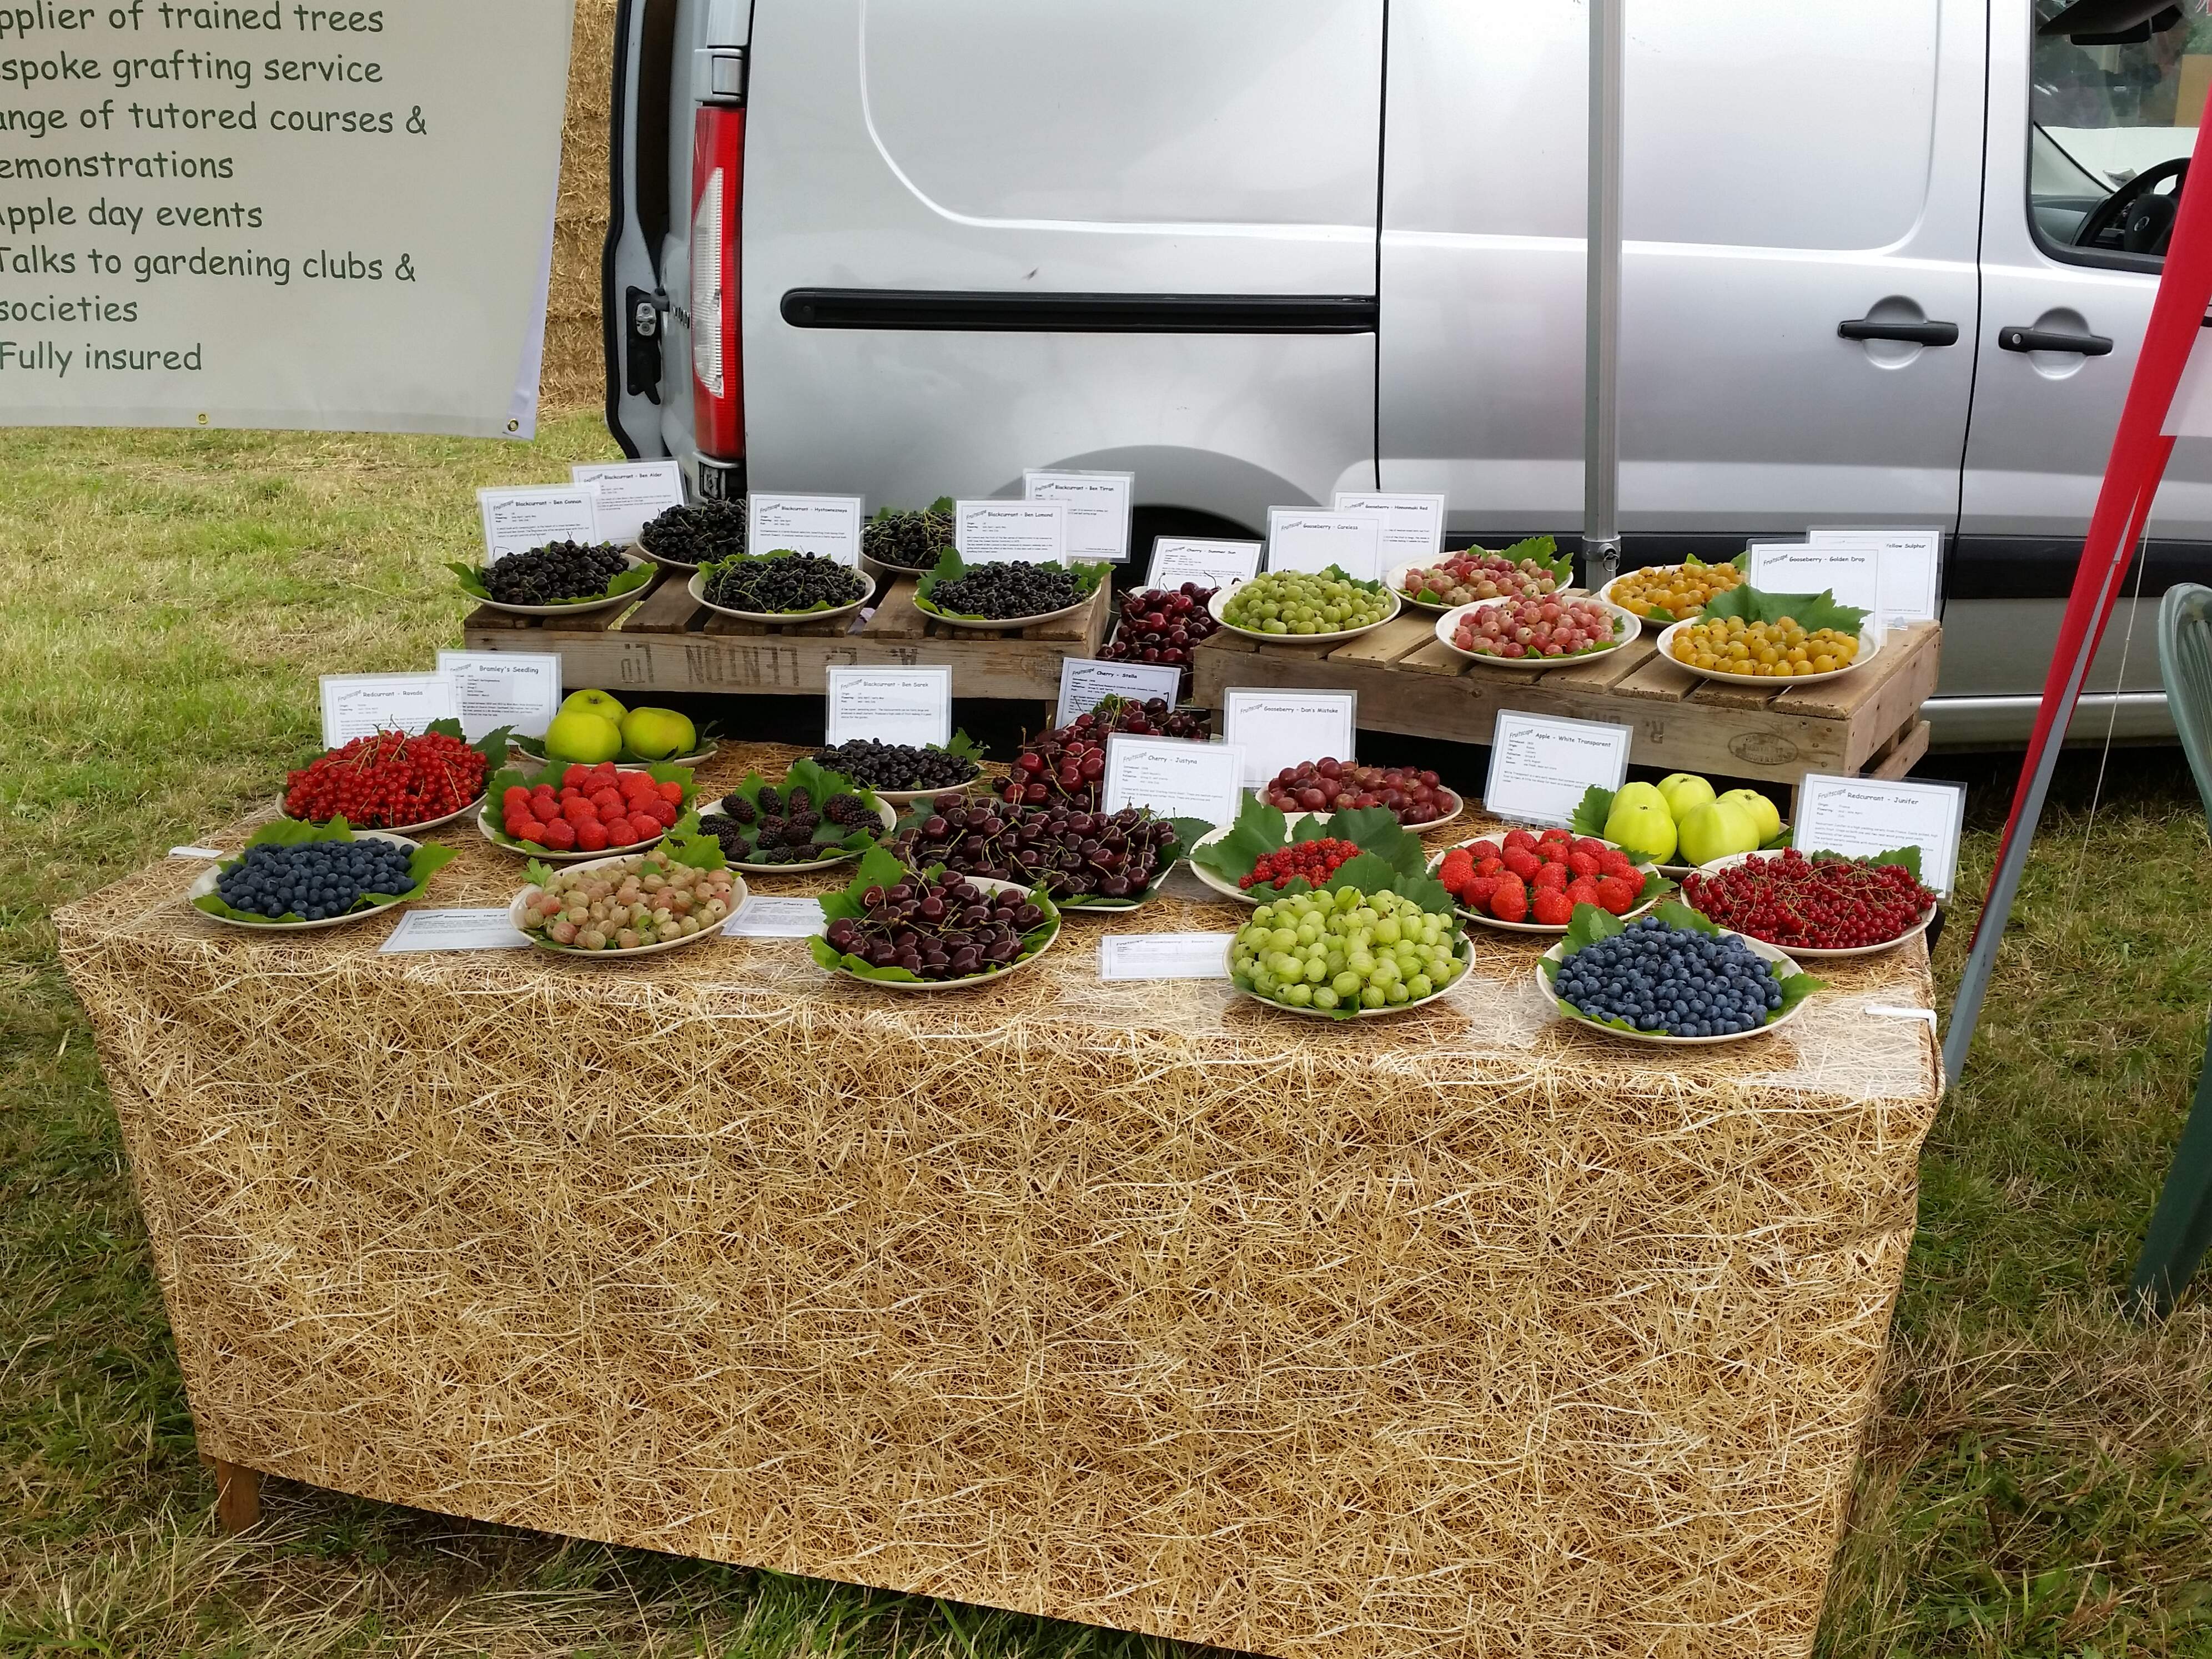 Seasonal display of fruit at Tockwith Show at the beginning of August